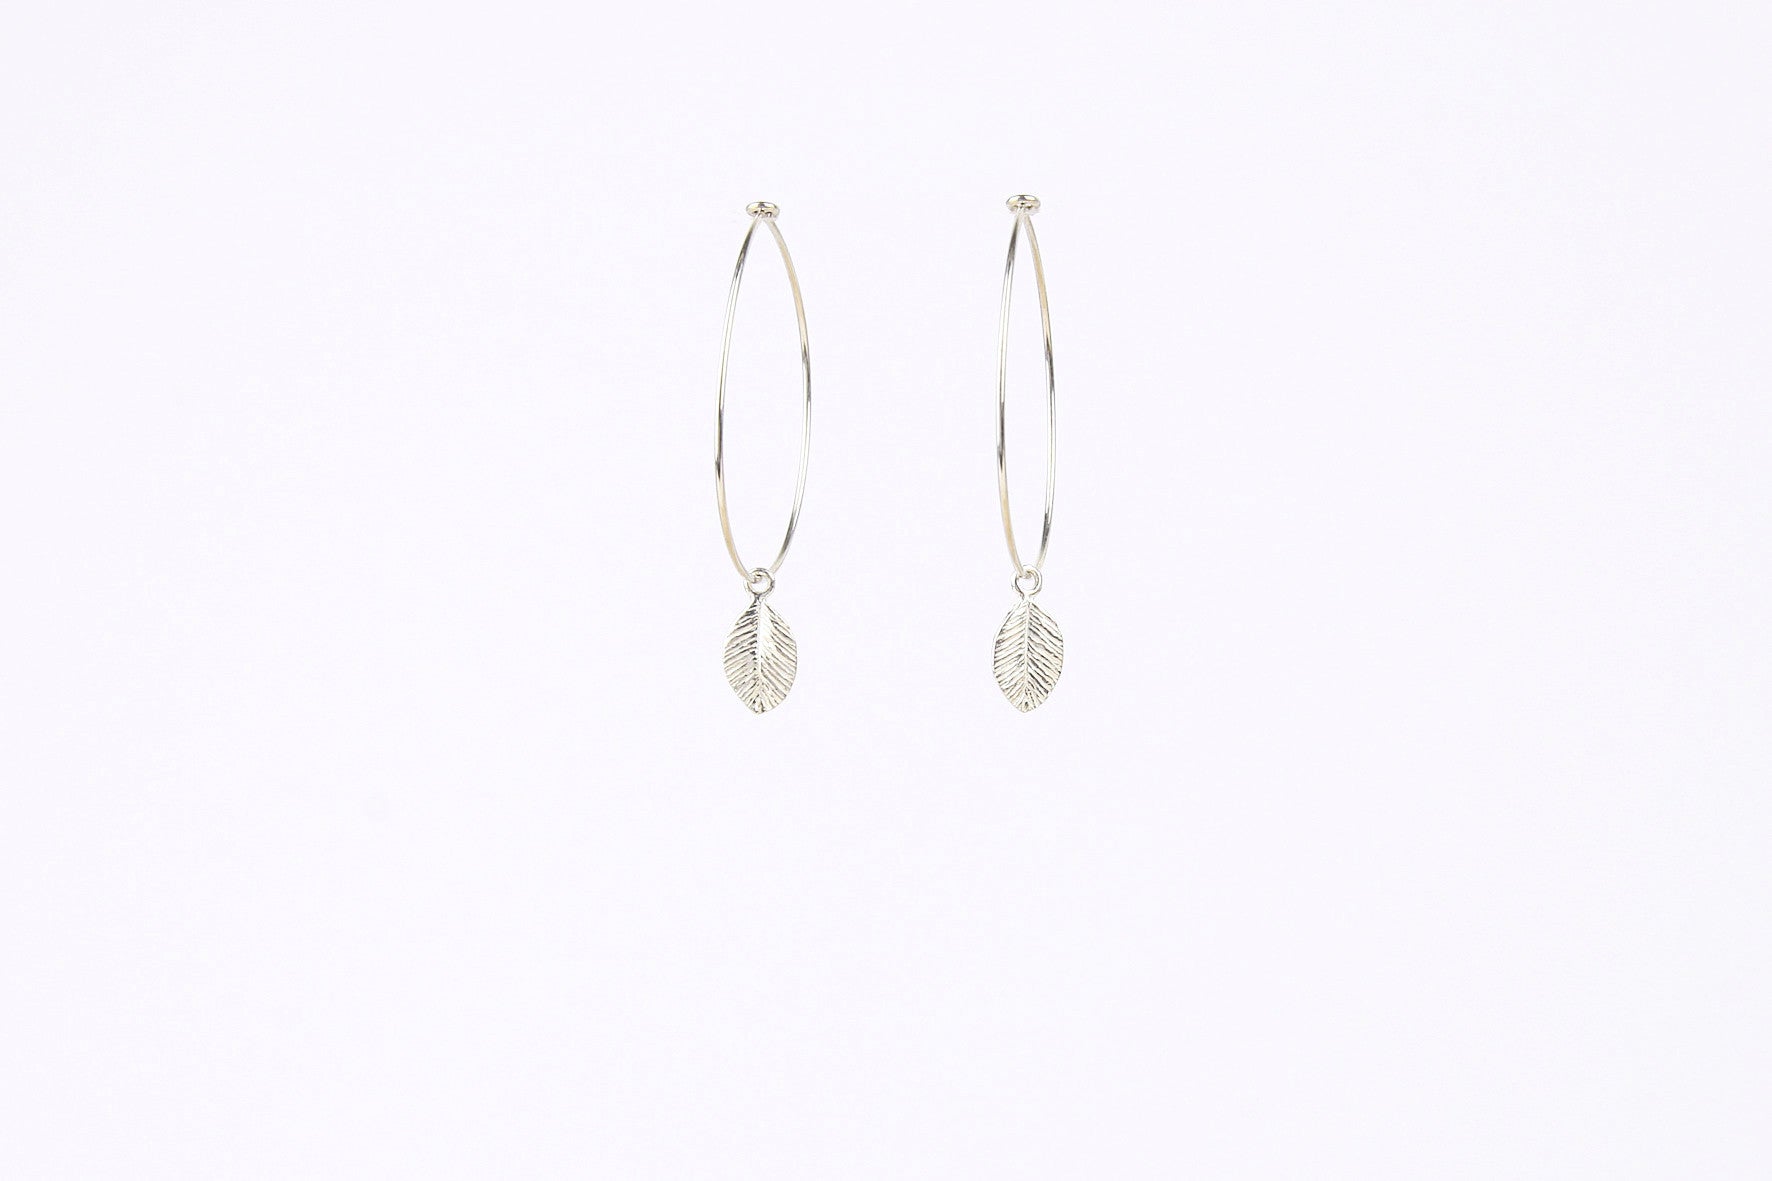 jewelberry ohrringe earrings tiny leaf hoops sterling silver fine jewelry handmade with love fairtrade